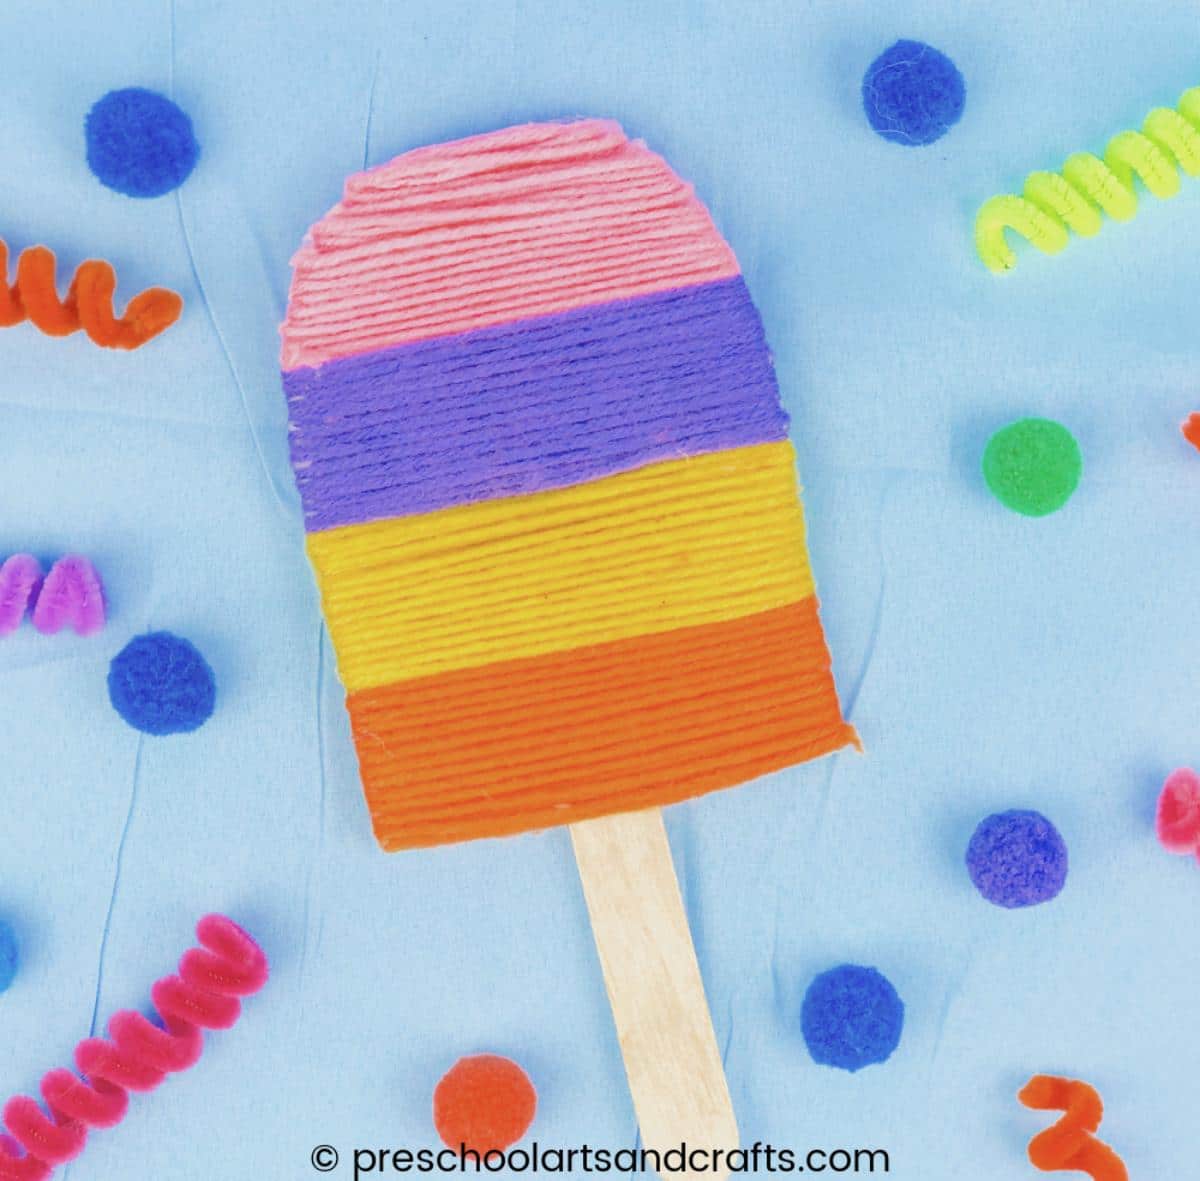 Yarn-Wrapped Popsicle Craft